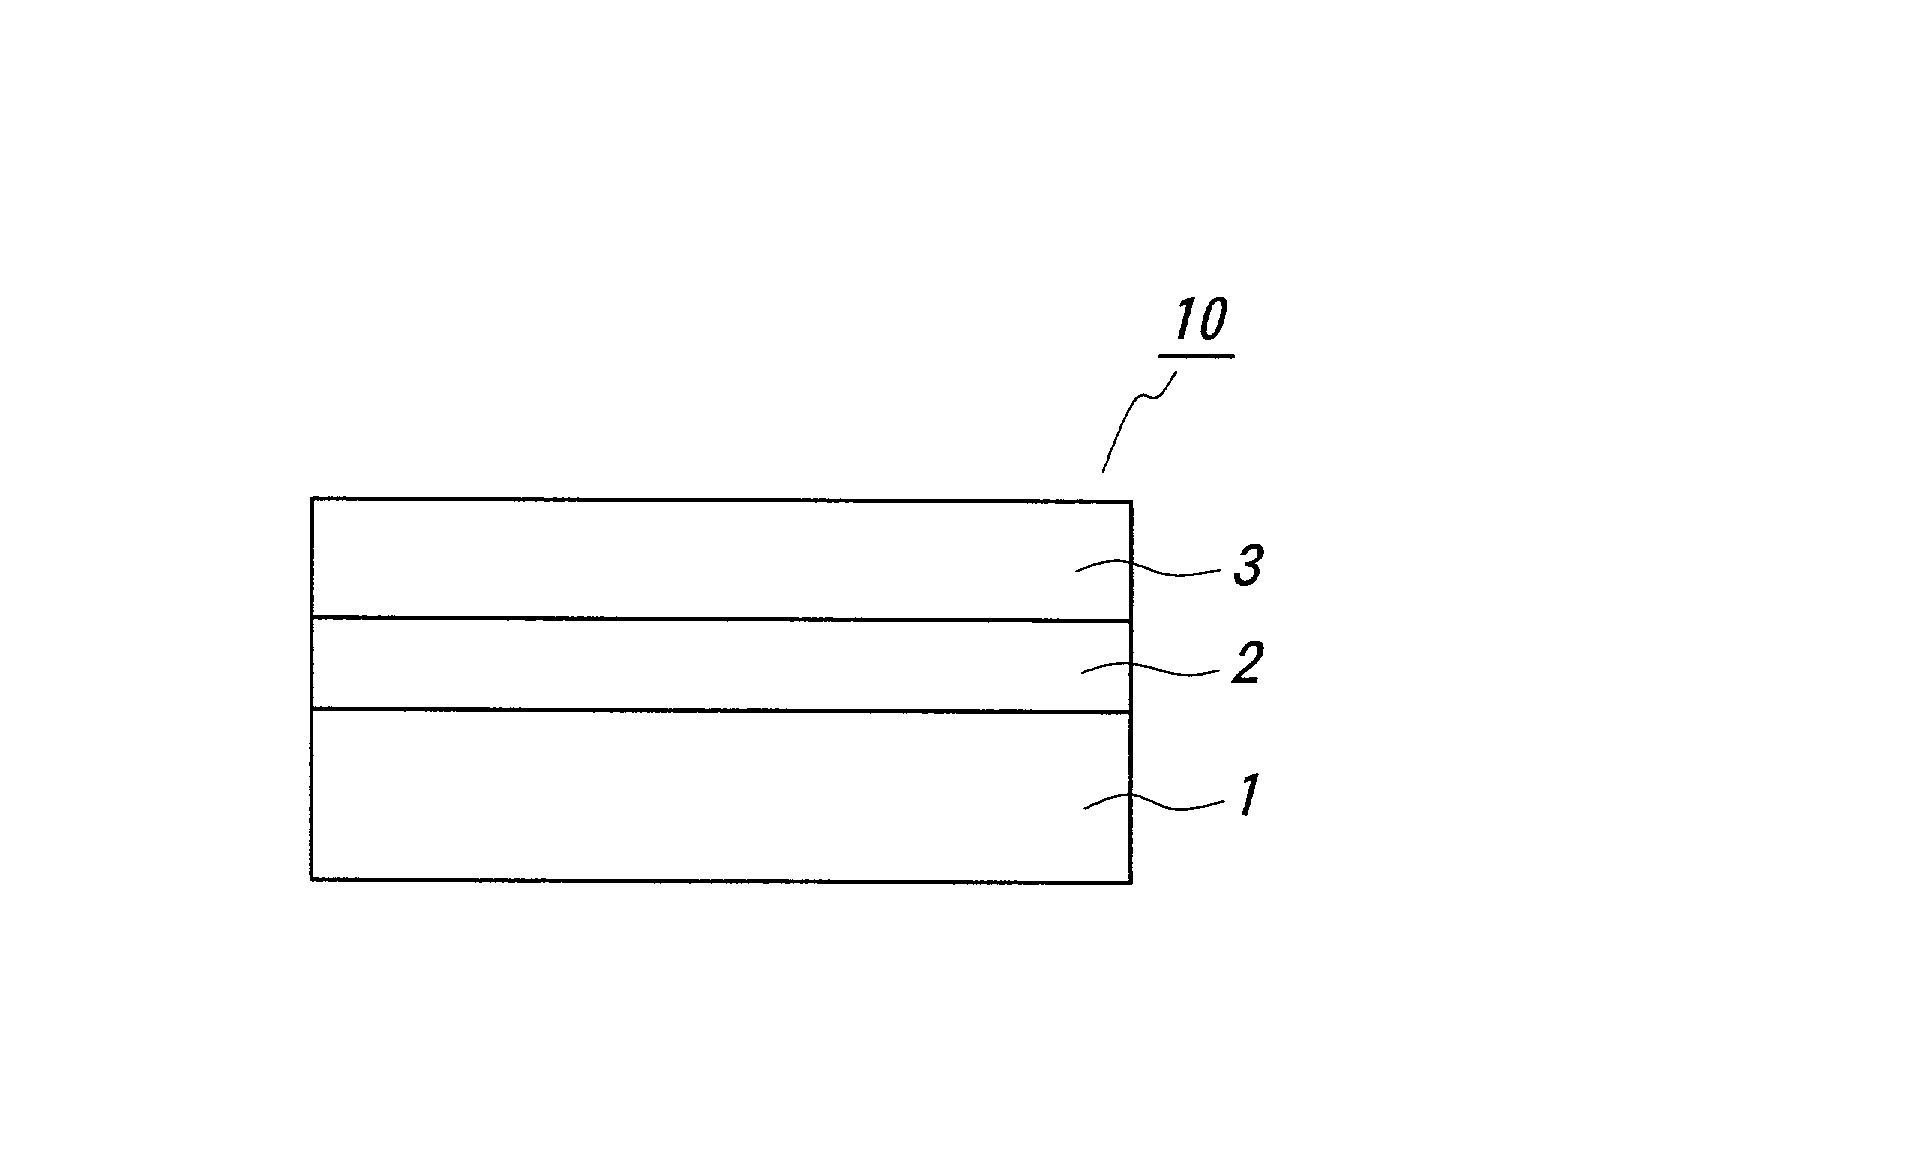 Epitaxial base substrate and epitaxial substrate